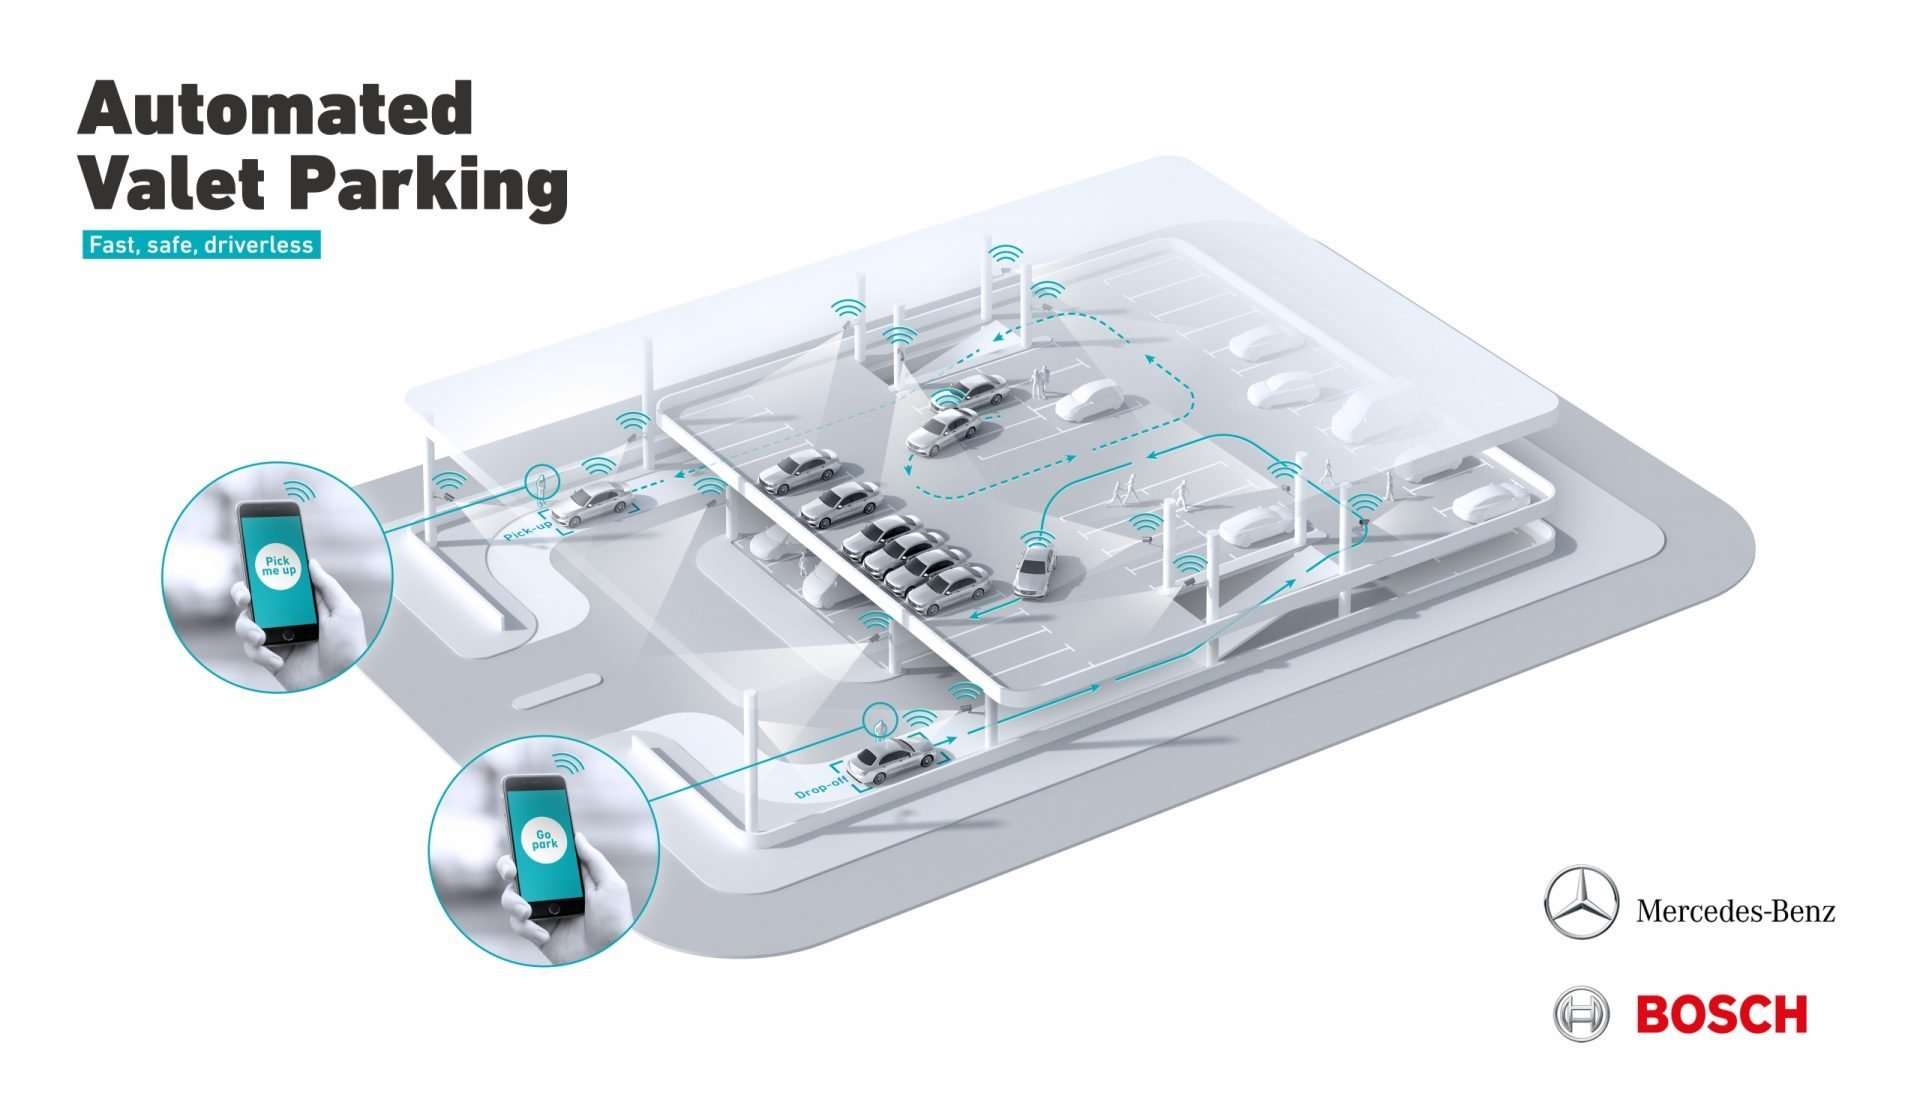 Bosch automated parking